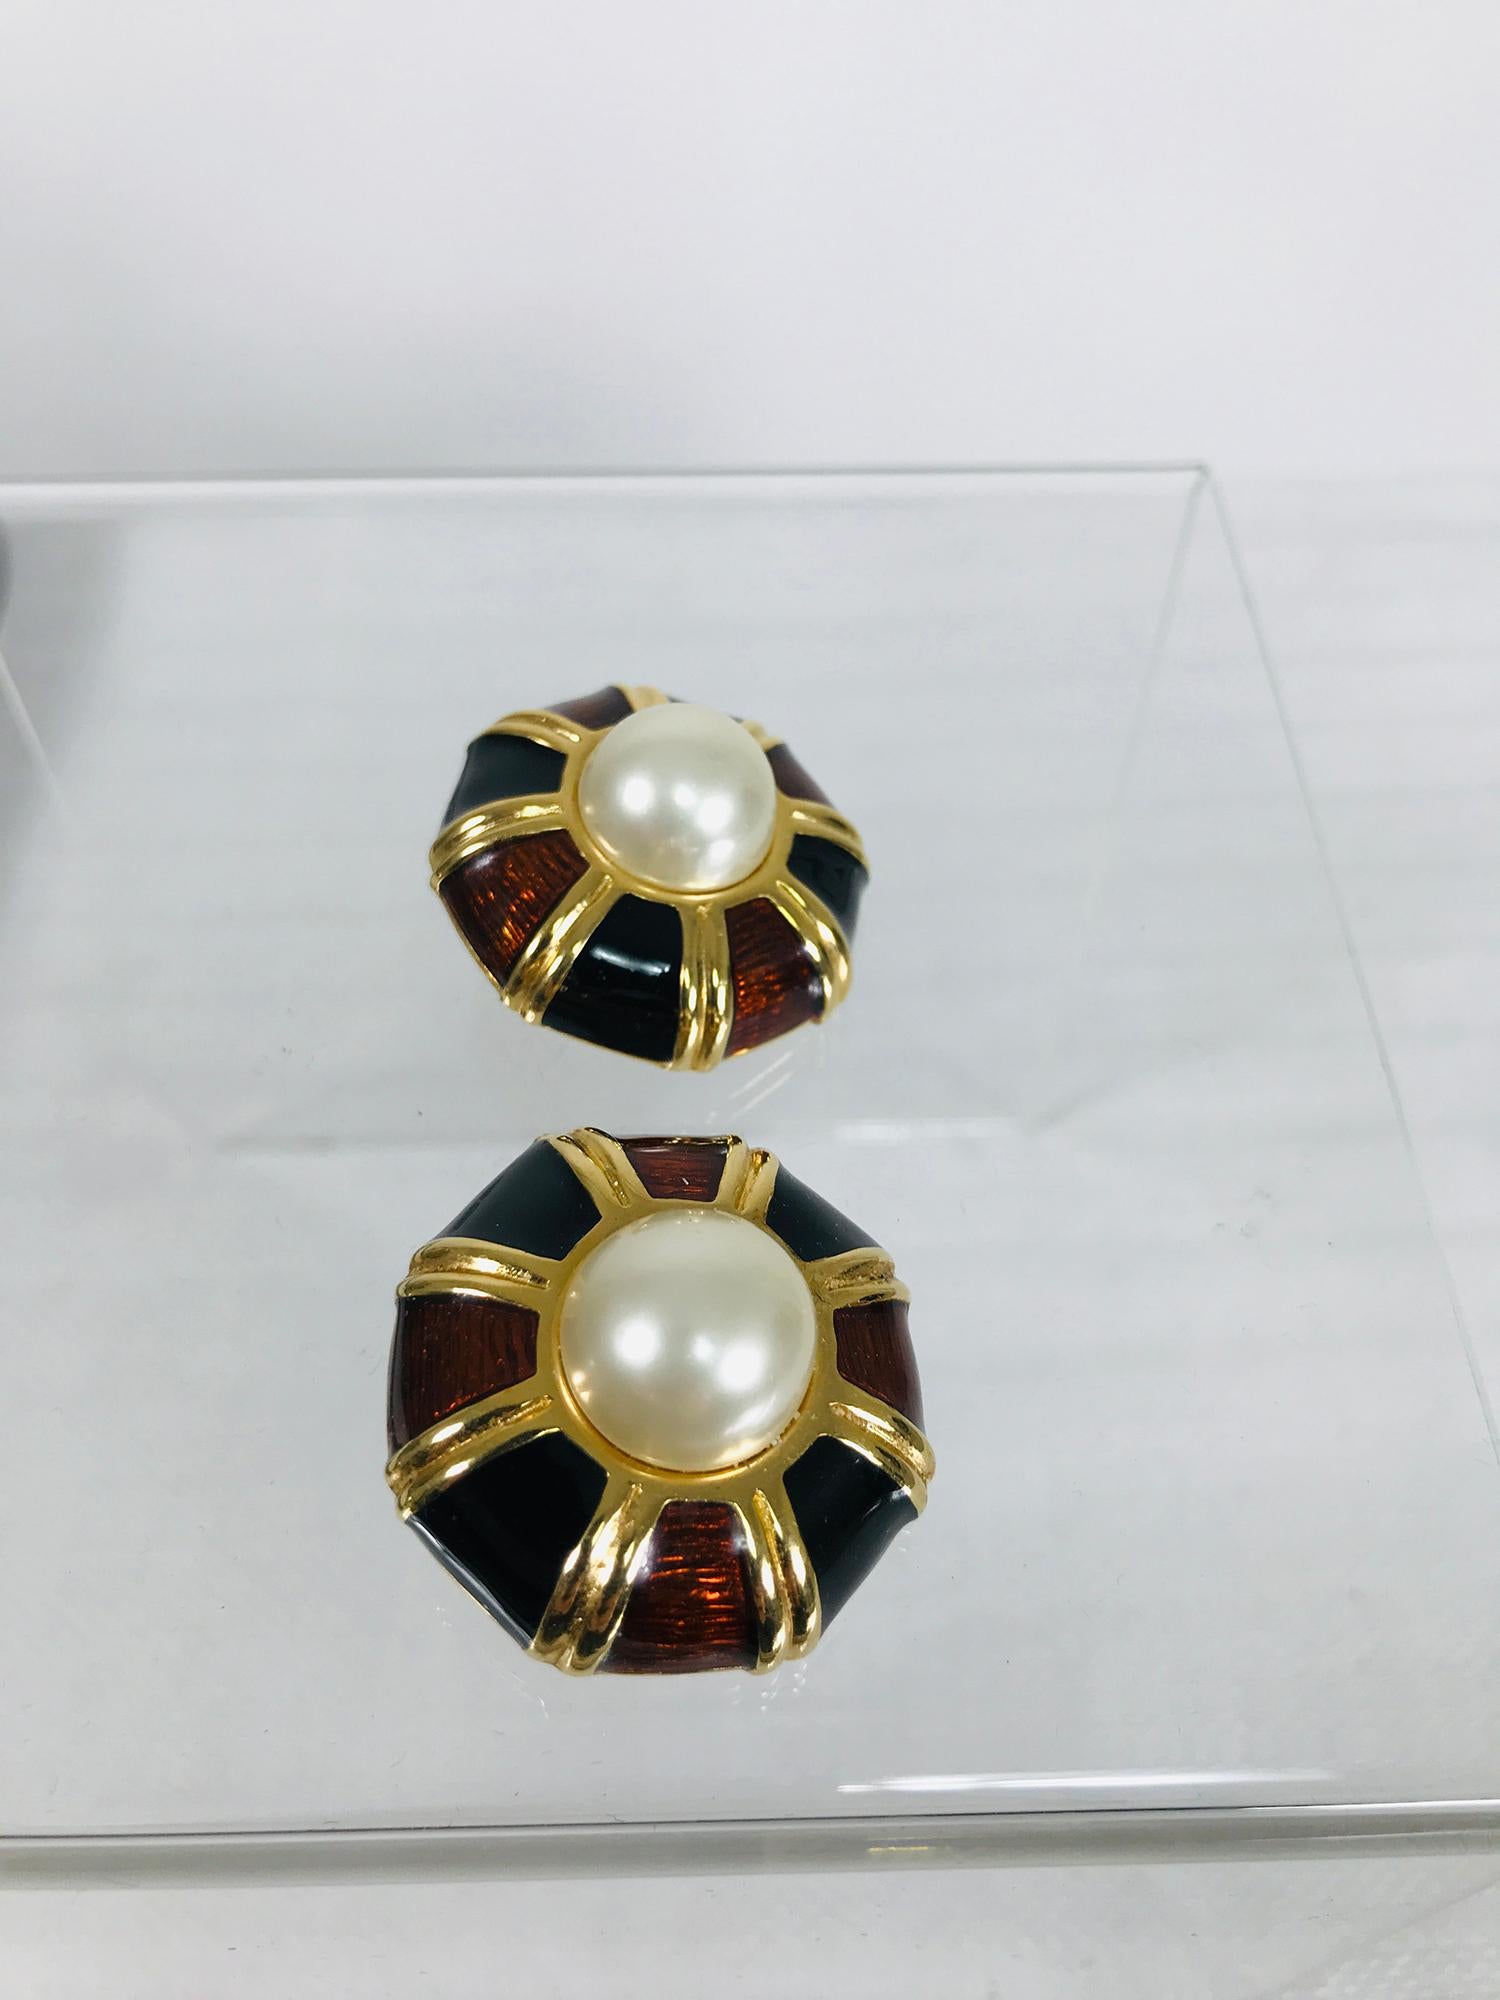 Ciner faux enamel, gold and pearl clip back earrings from the 1990s. Large and eye catching in amber and black enamel. Clip backs. In very good condition.
1 1/2